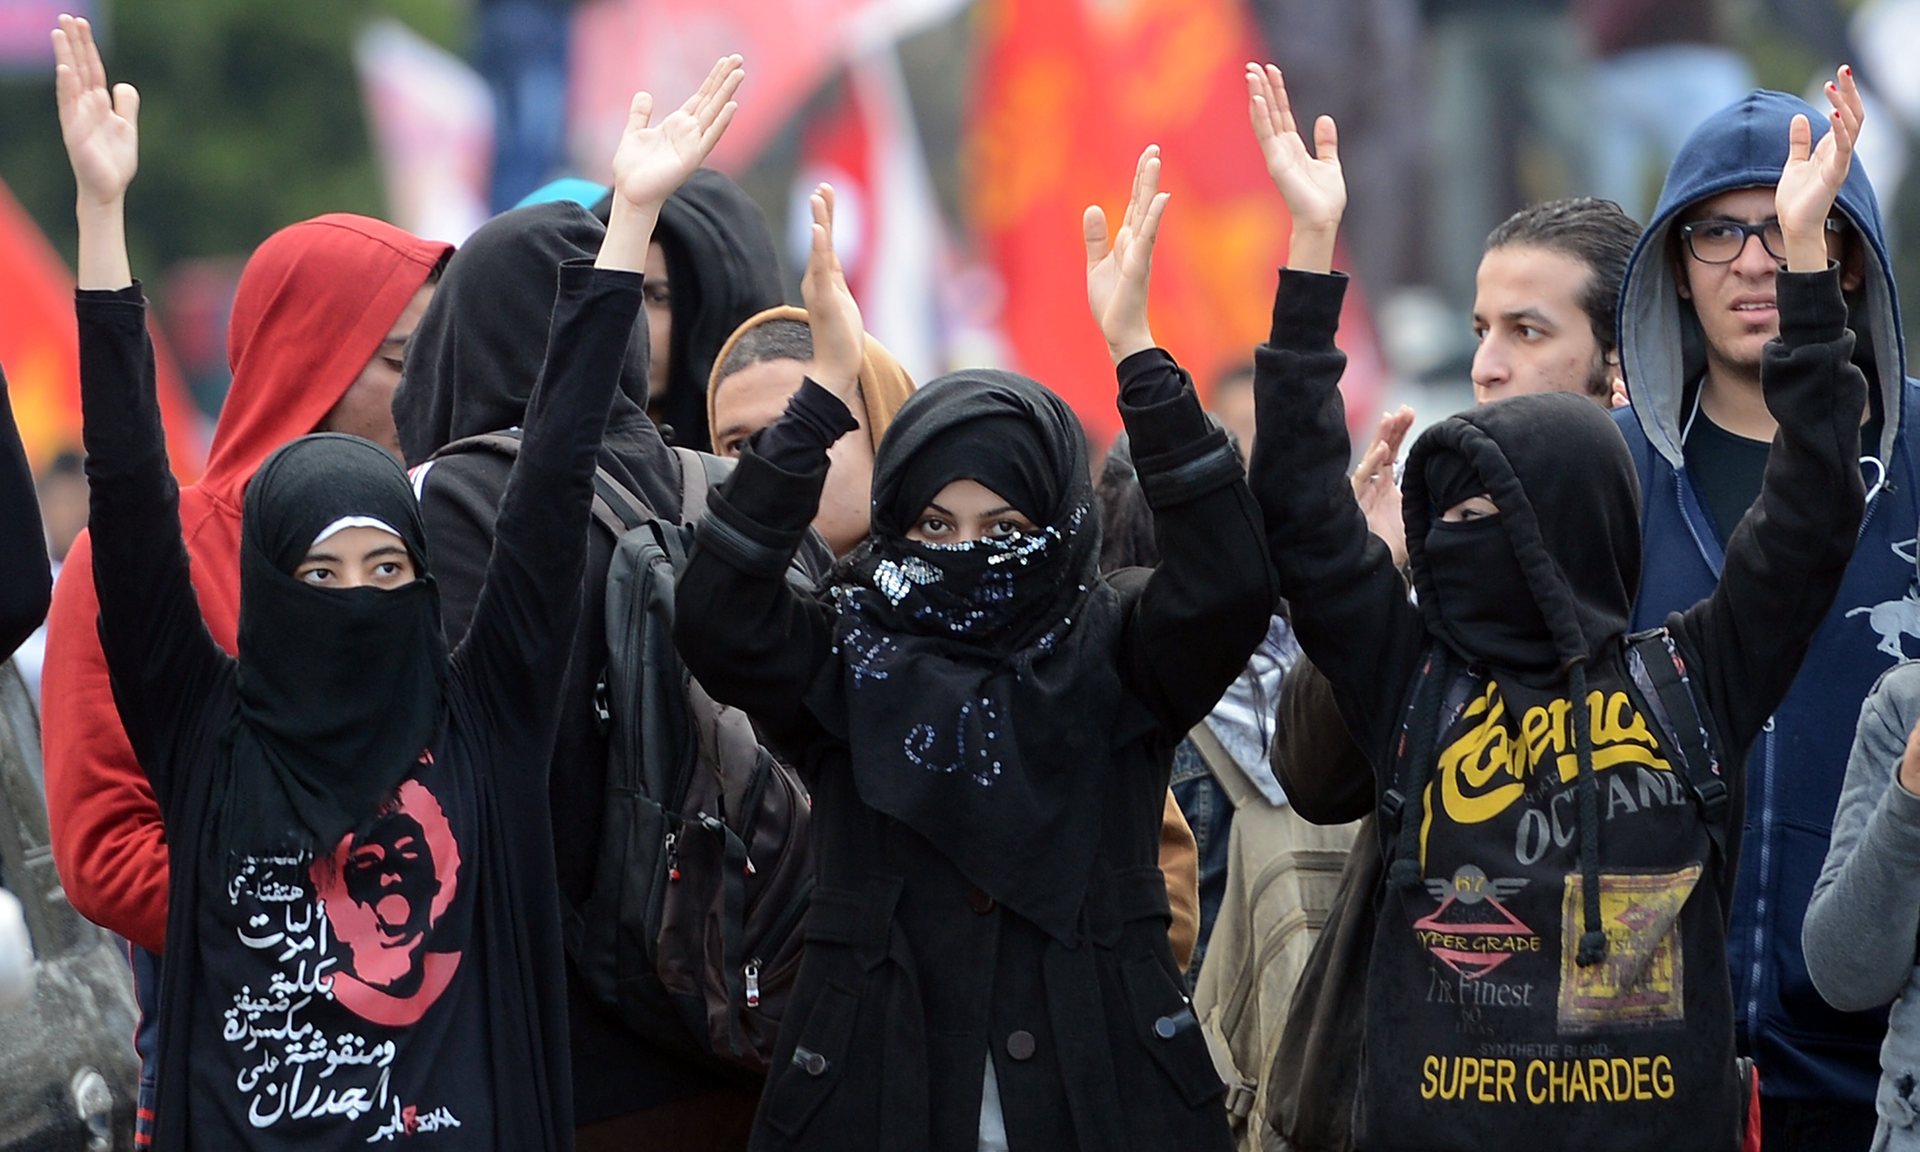 Young members of Egypt’s Black Bloc group, who model themselves on western anarchists, in Cairo, February 2013. Photograph: Khaled Desouki/AFP/Getty Images